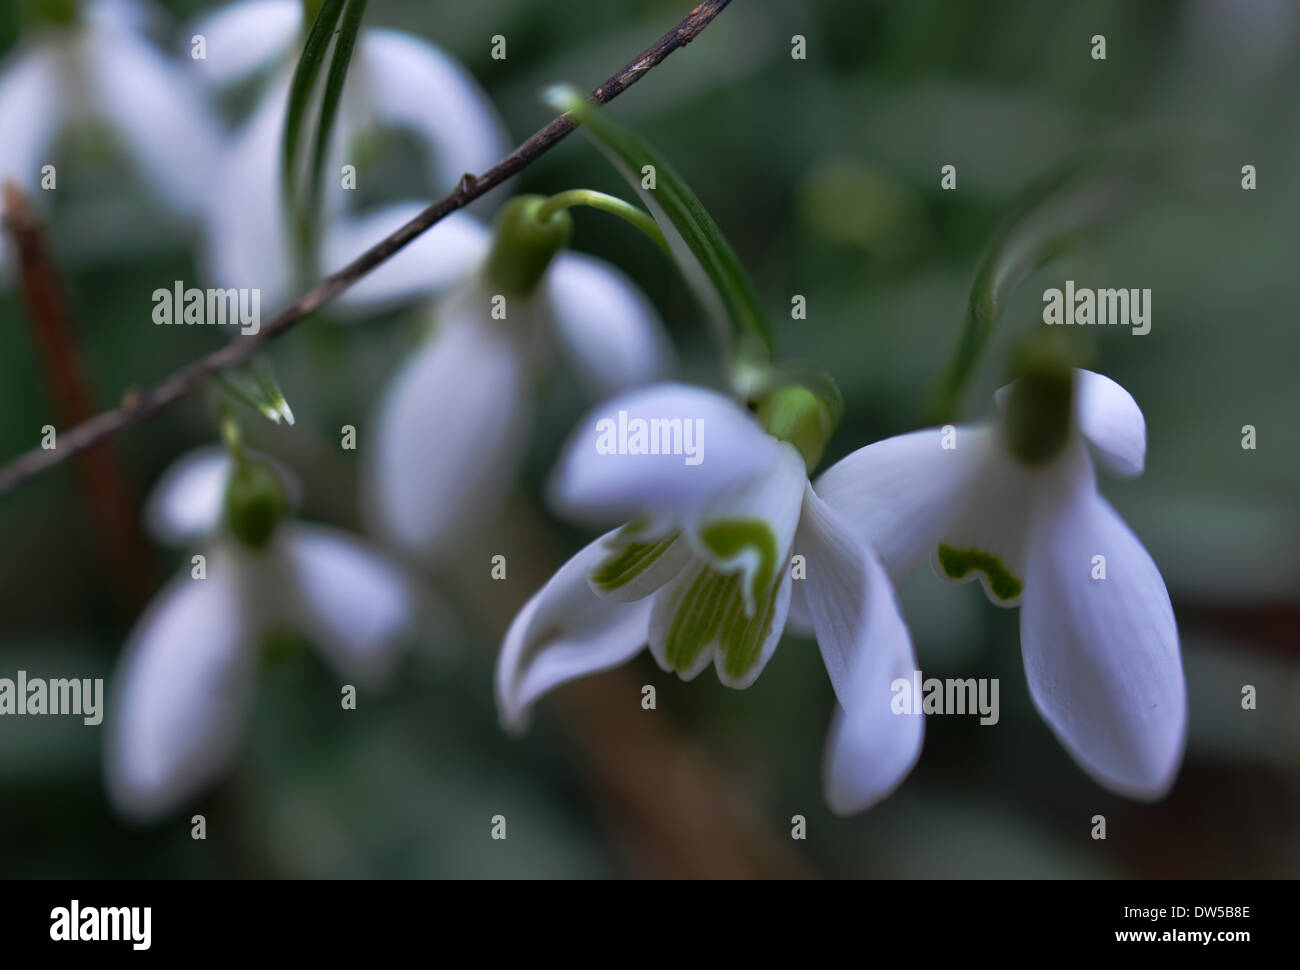 The premature by four weeks is possible spring blossoming crocuses in Germany, while the snow bells  already came forth for 14 days. | Stock Photo